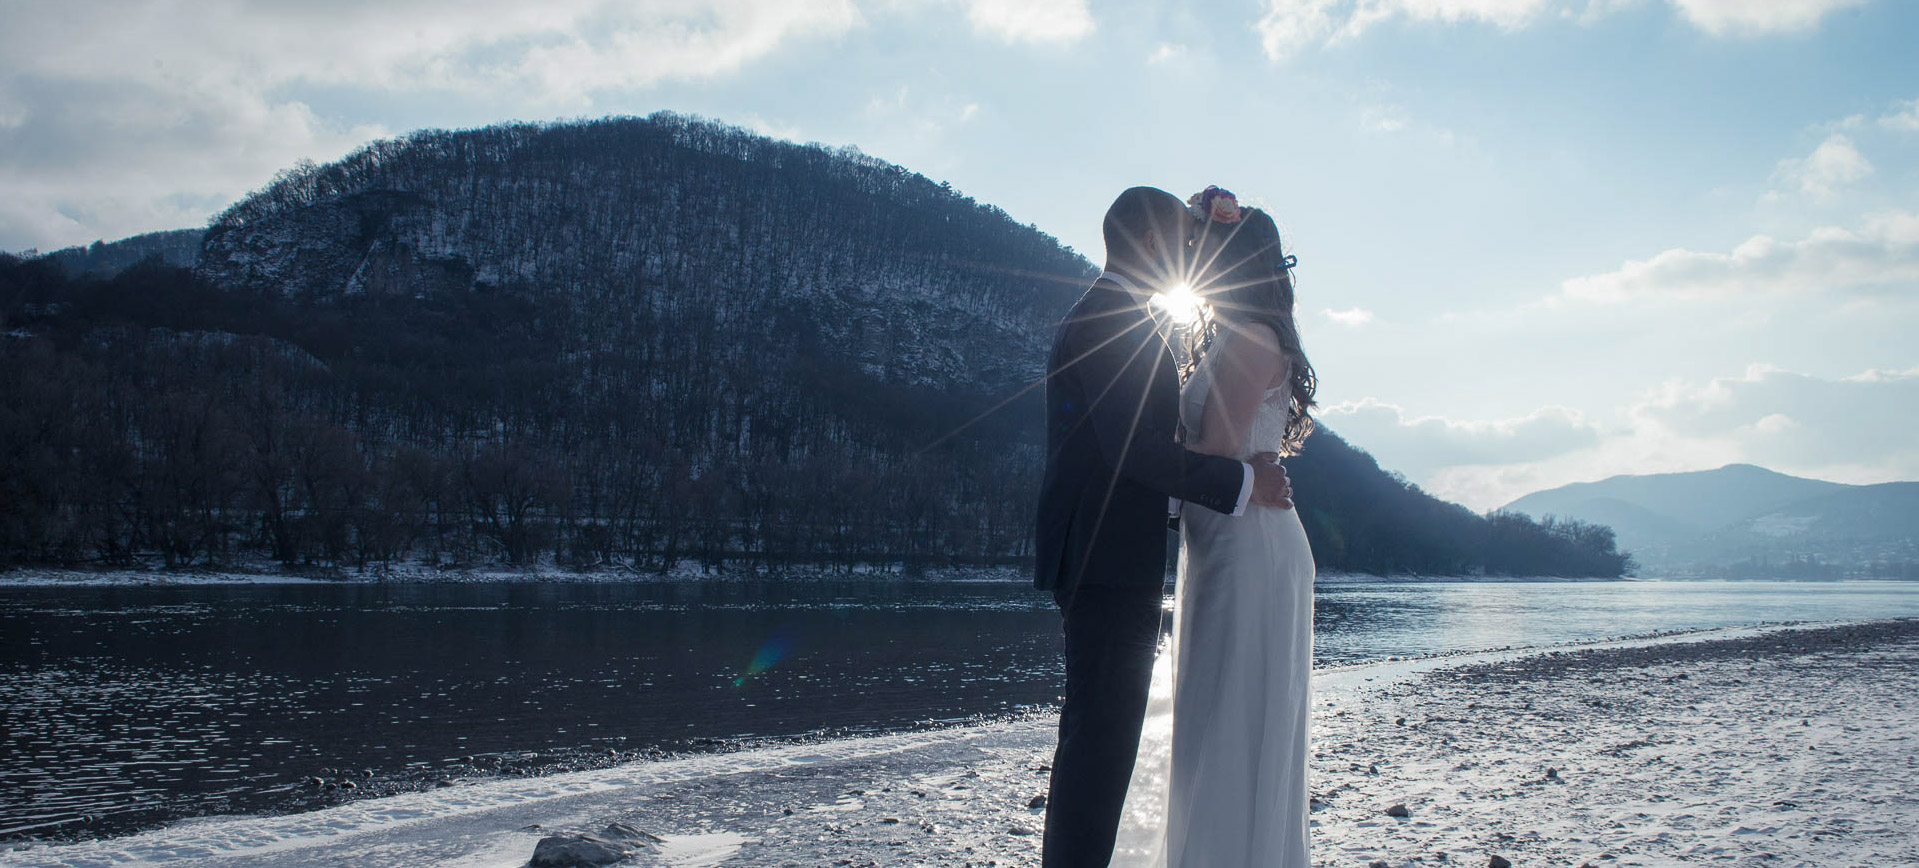 Adventure wedding in Hungary - hiking and kayaking - a time for a kiss